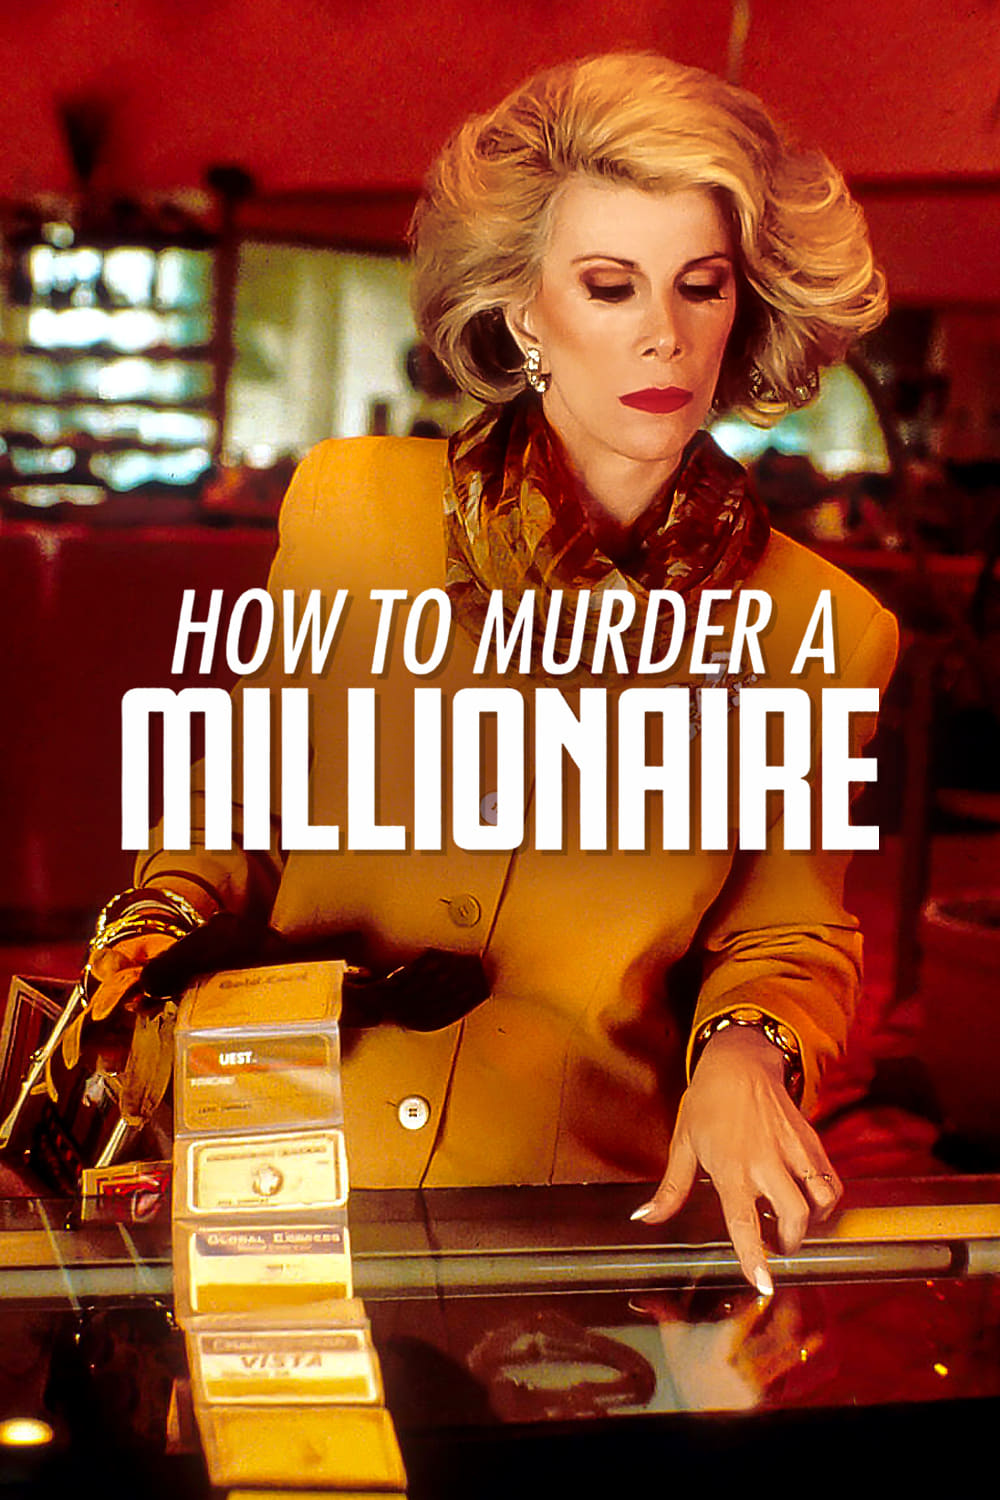 How to Murder a Millionaire (1990)